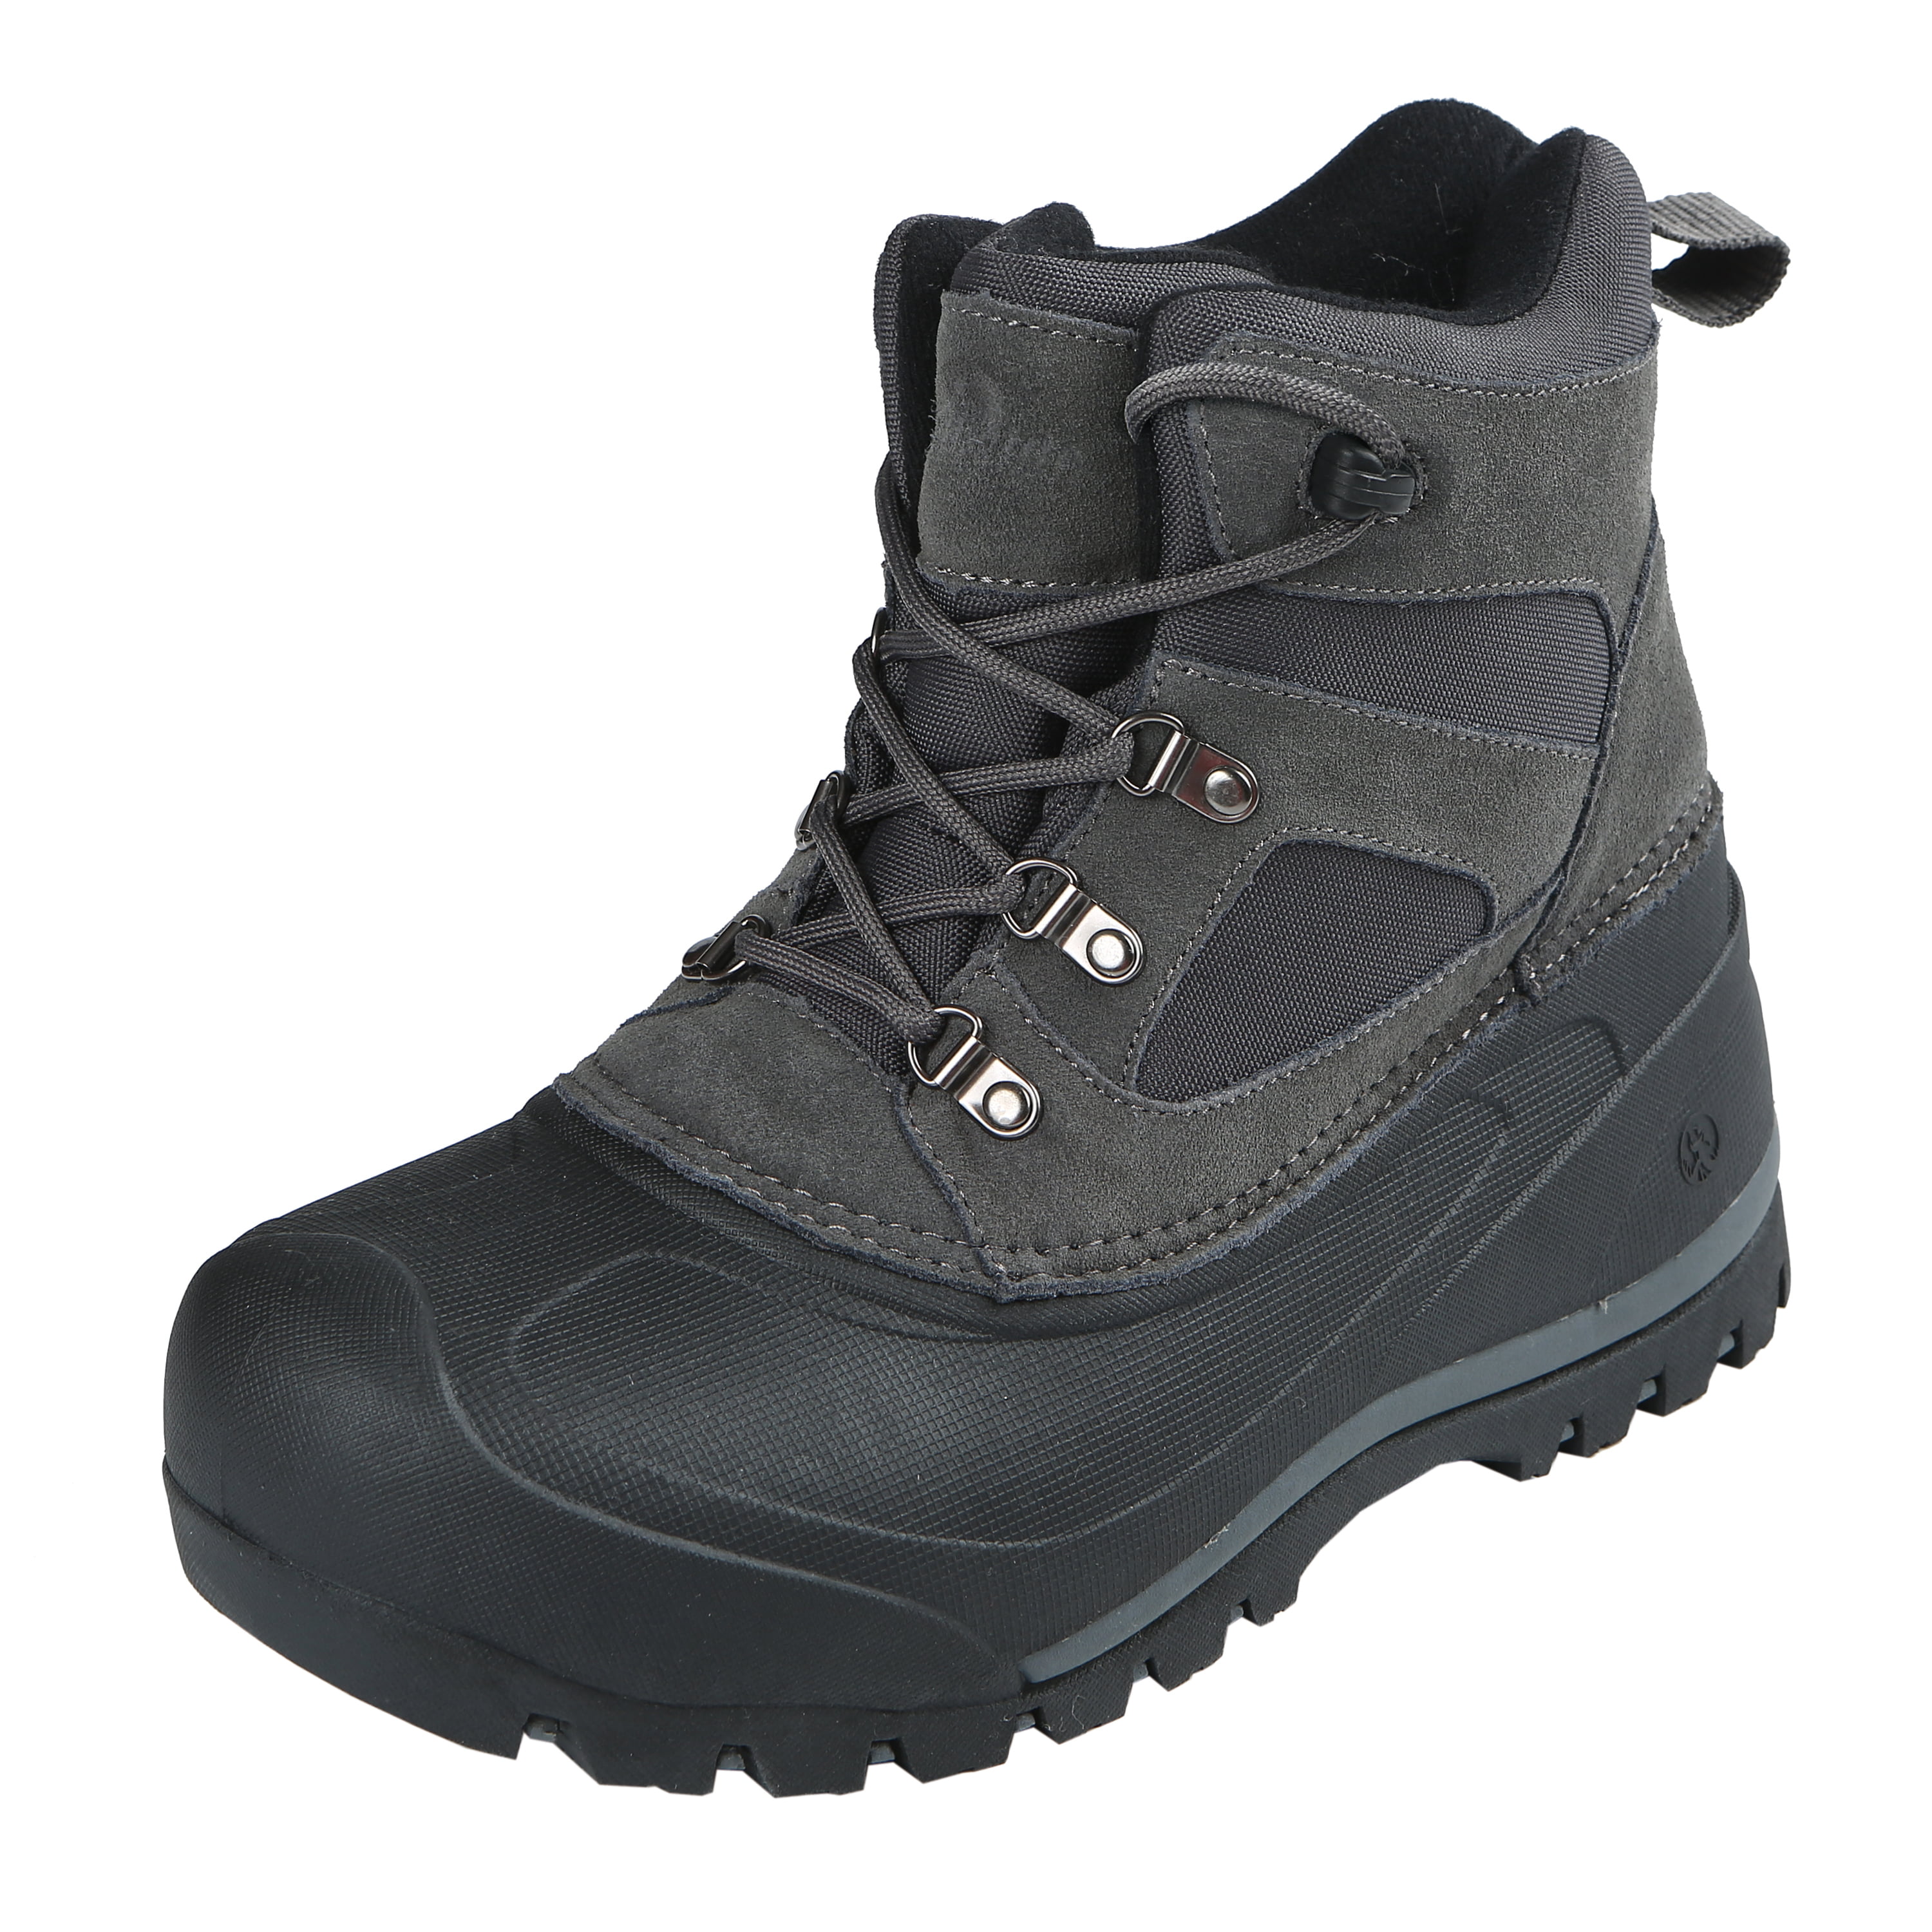 Northside Mens Tundra 200 Gram Insulated Leather Winter Snow Boot ...